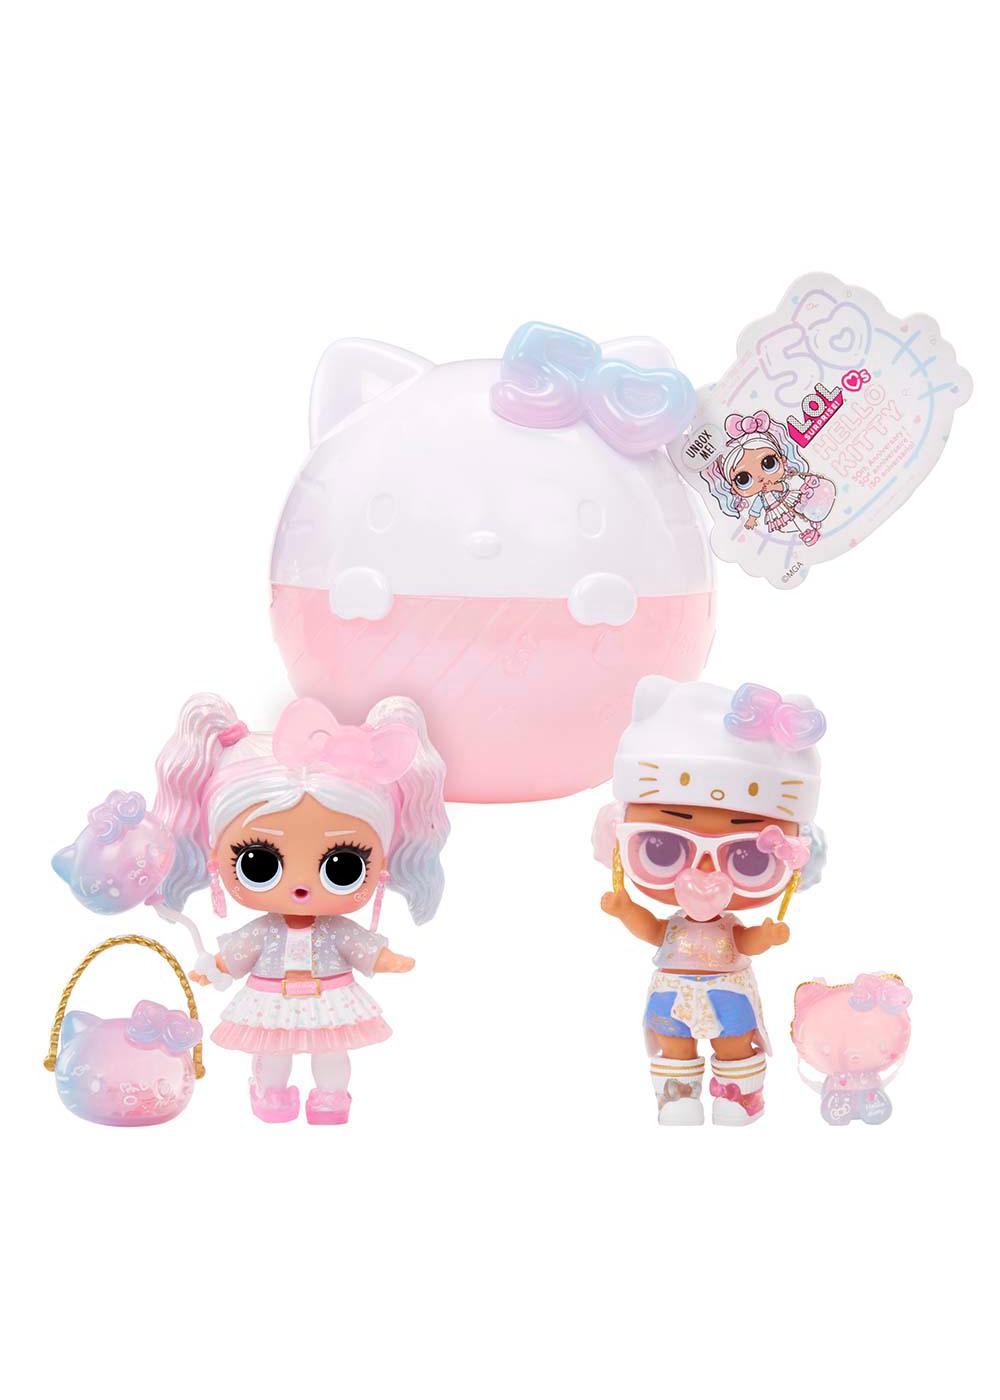 L.O.L. Surprise! Loves Hello Kitty Tots 50th Anniversary Capsule; image 3 of 5